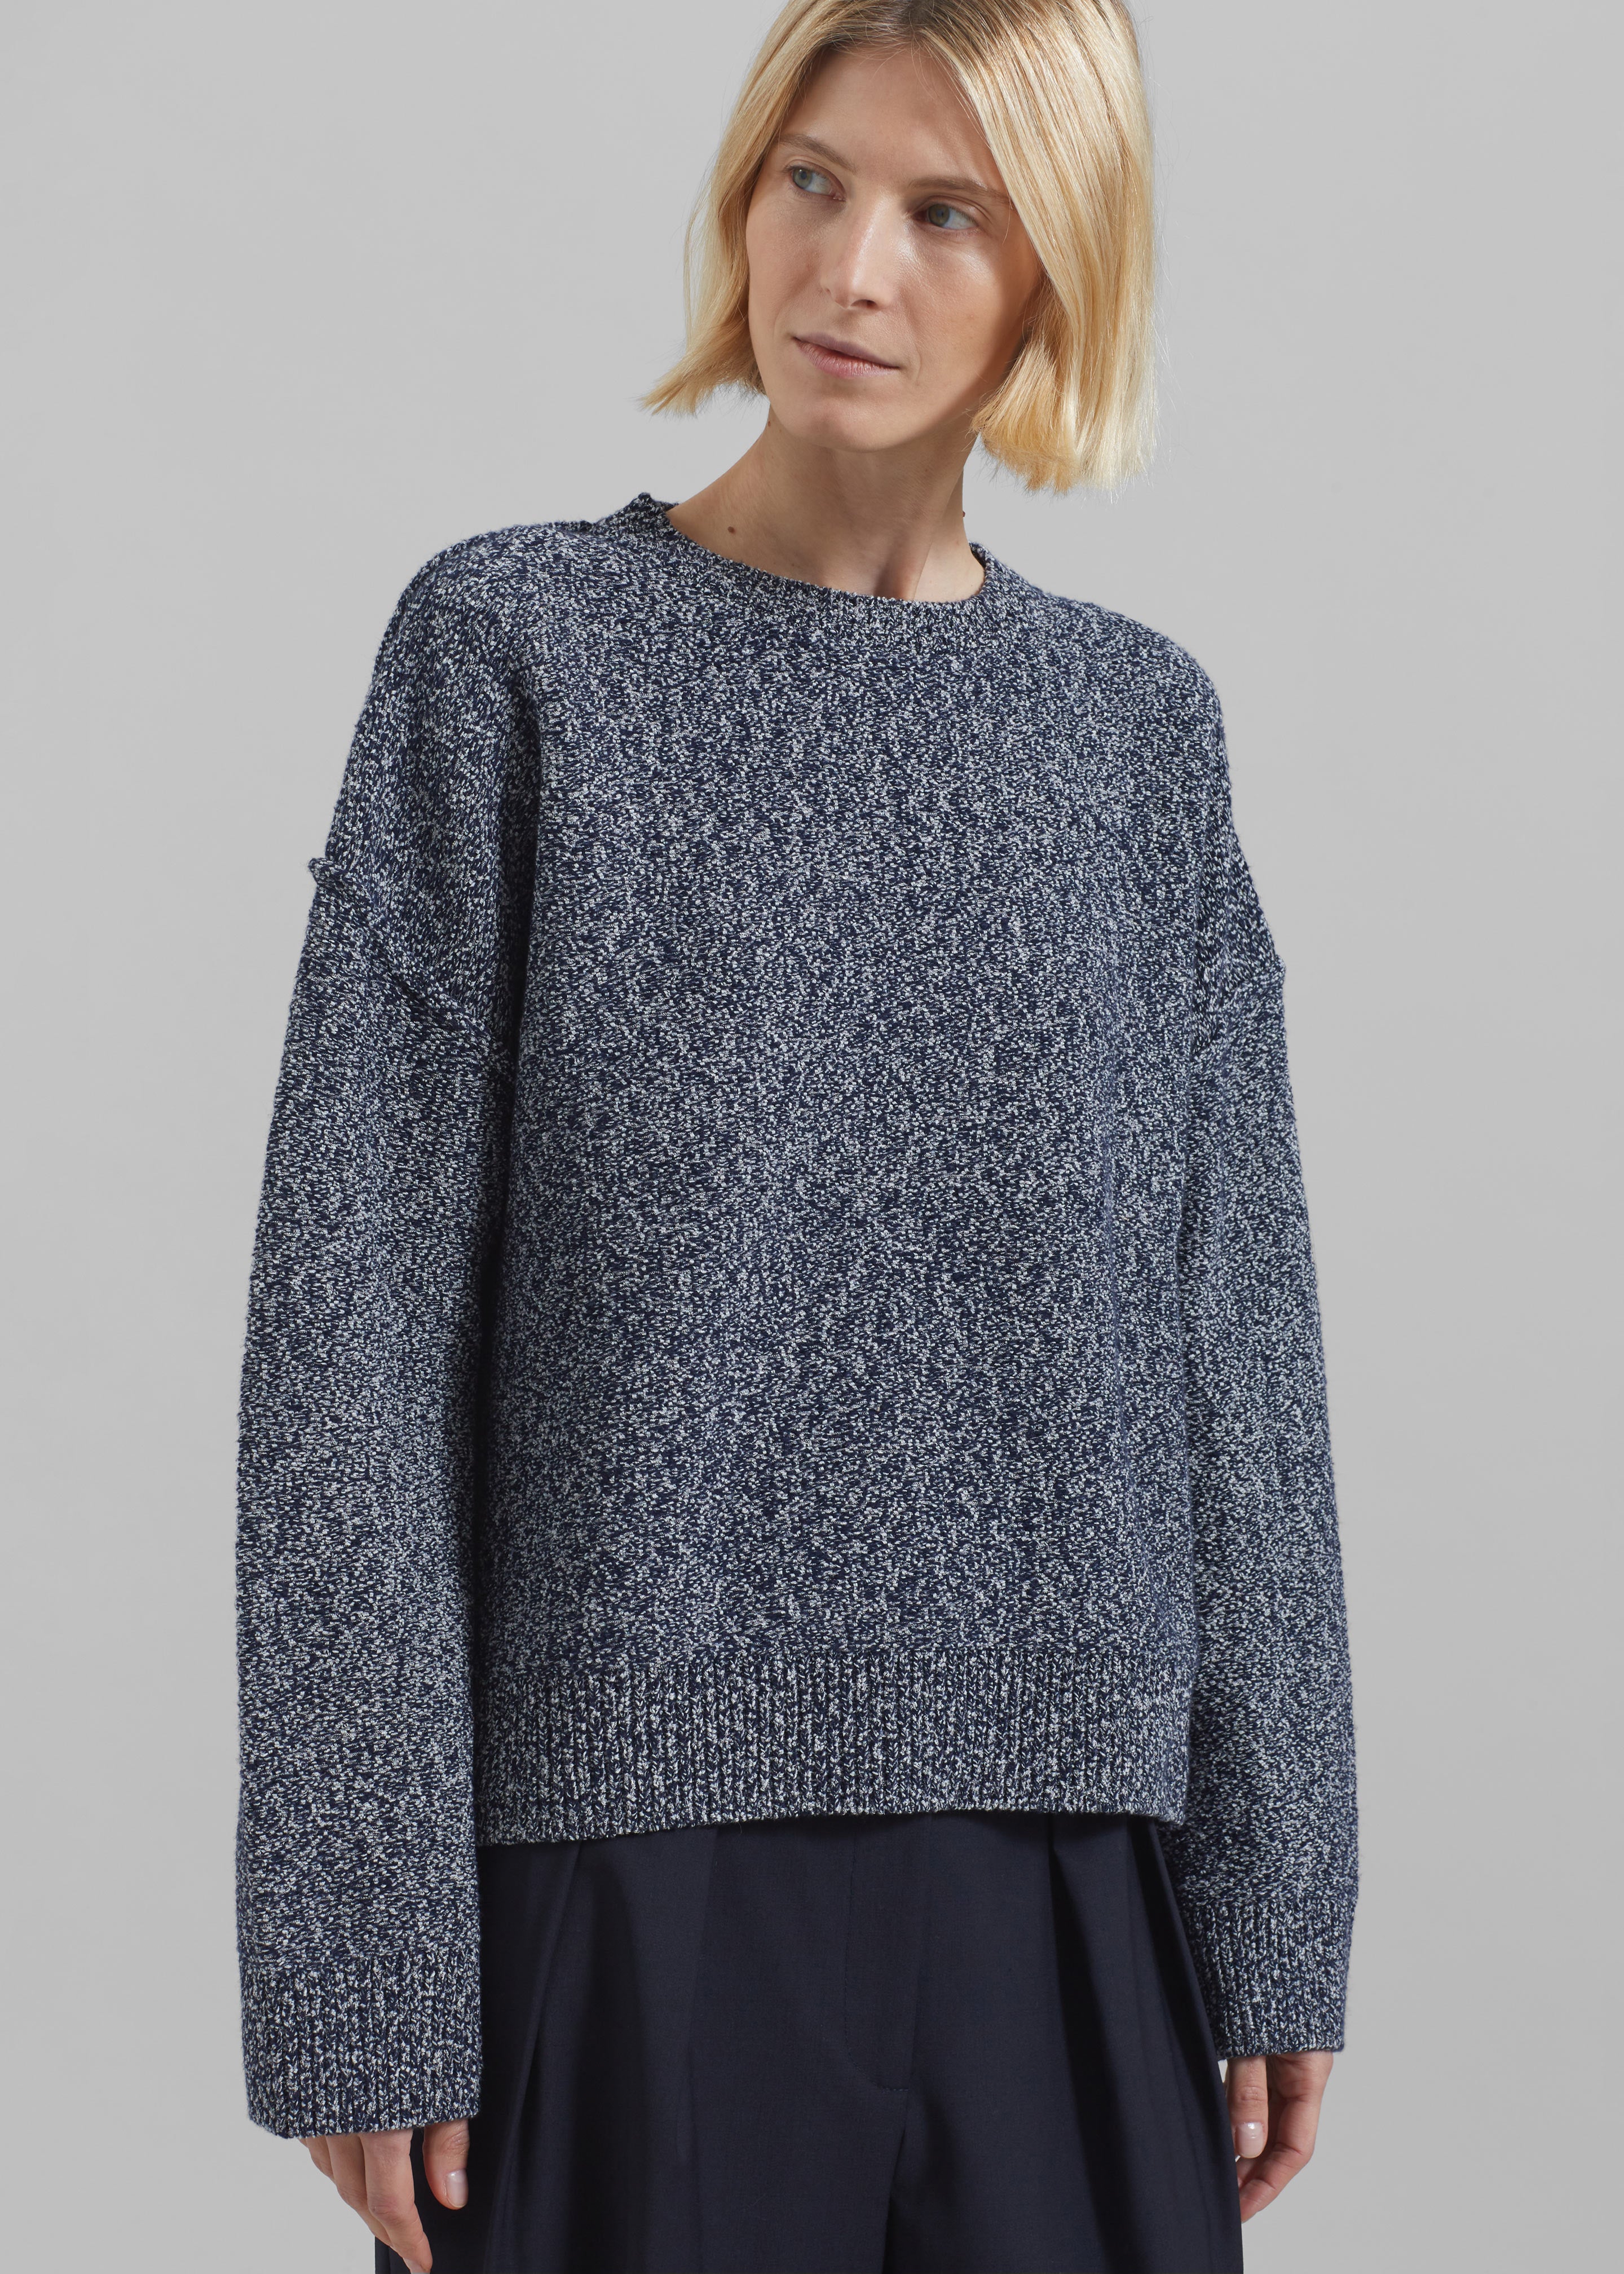 Proenza Schouler White Label Remy Sweater In Marled Knits - Dark Blue/Off White - 4